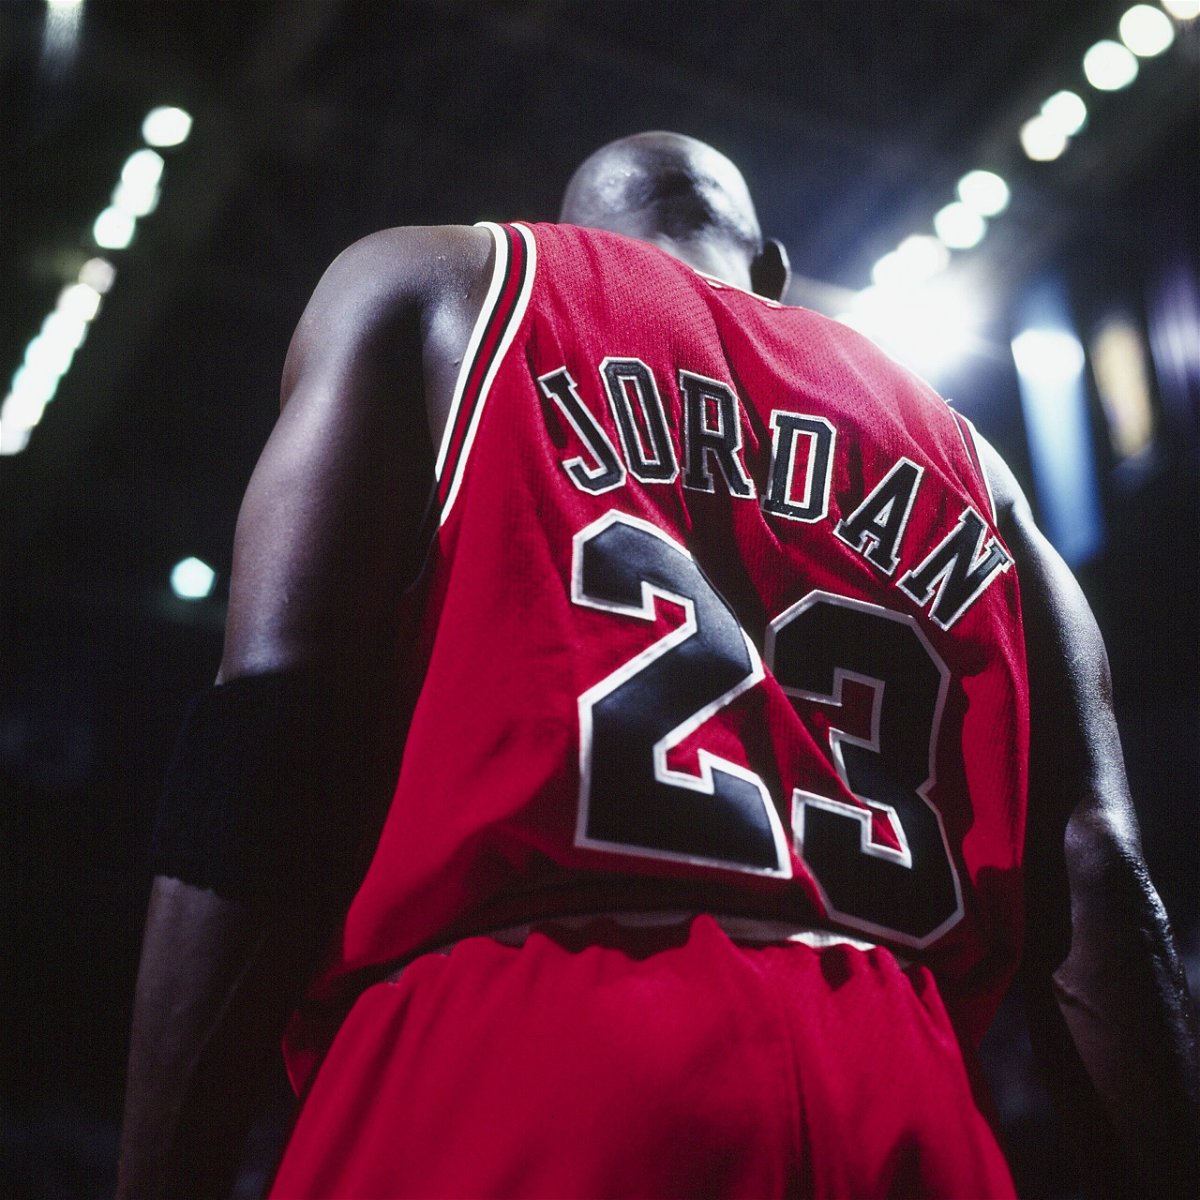 <i>John W. McDonough/Sports Illustrated/Getty Images</i><br/>Michael Jordan of the Chicago Bulls is pictured during the 1998 NBA Finals in Salt Lake City.